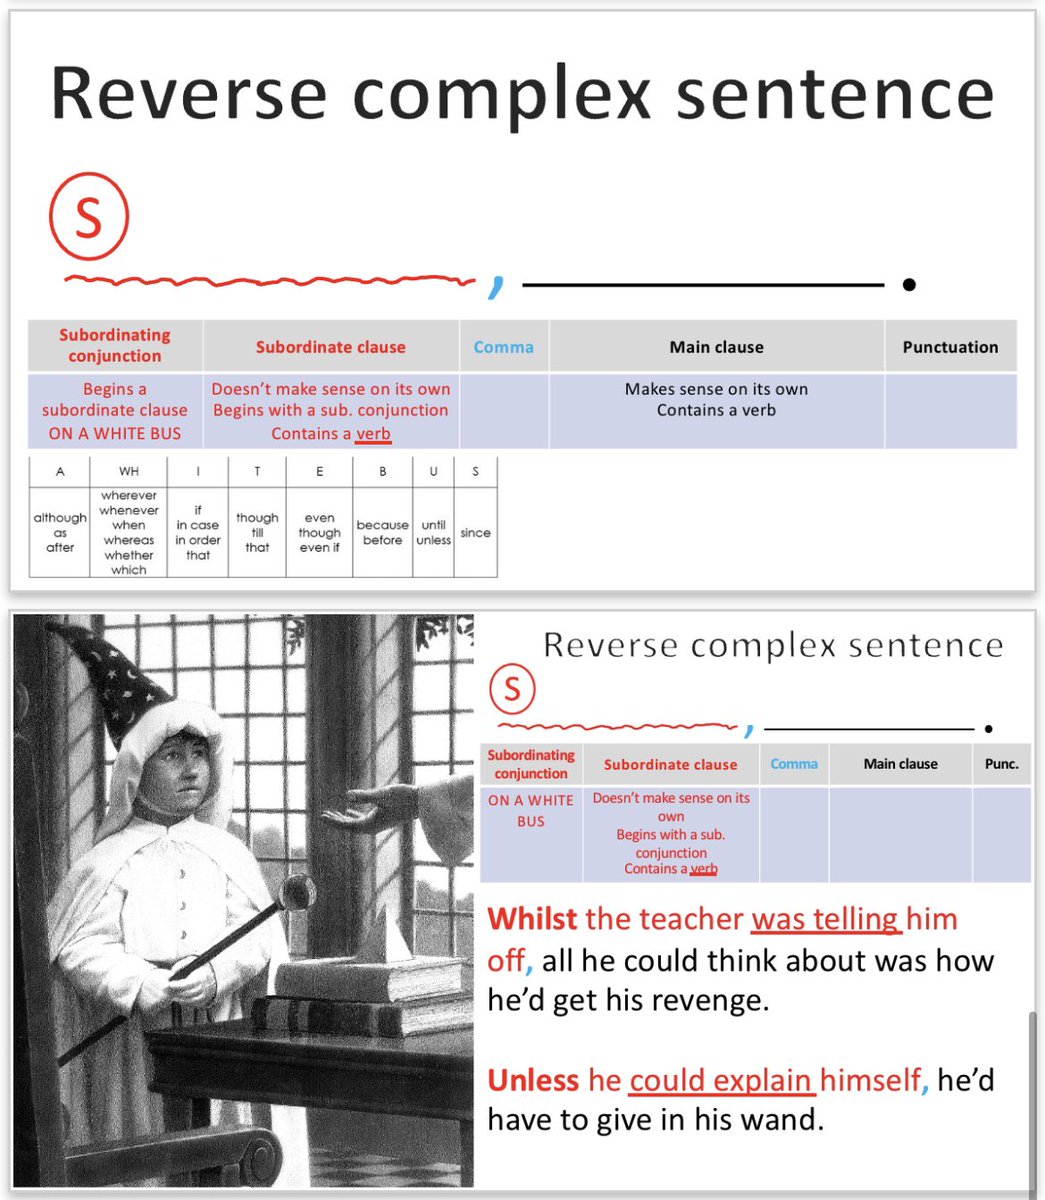 Going right back to basics with my y5/6s after a thorough assessment of their writing last term. Loved the idea from @hiasenglish to represent sentences as diagrams so I’ve adapted this again from a few years ago to give a crack next week